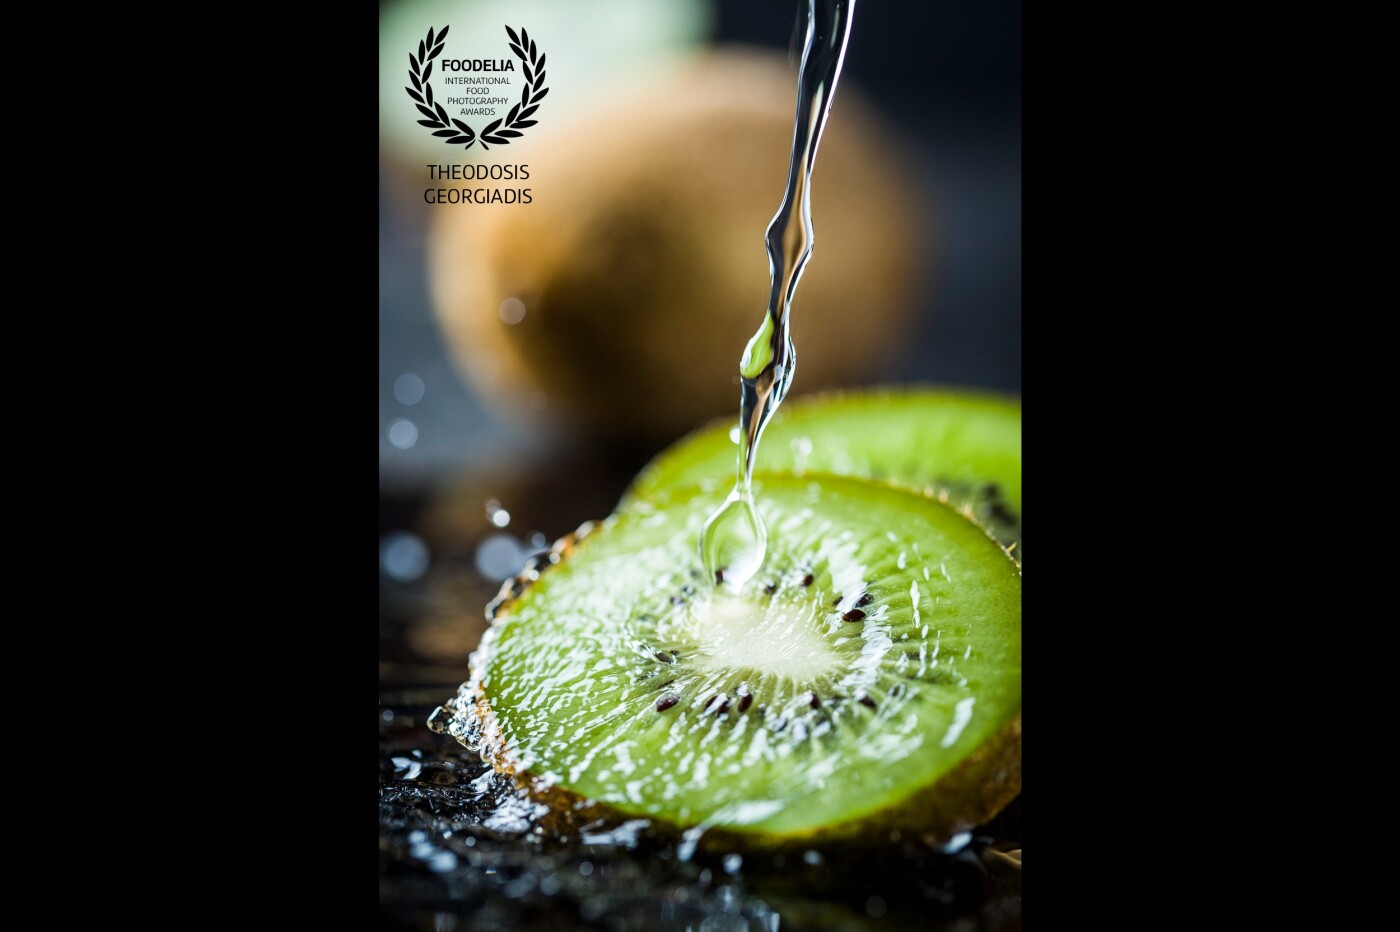  Splash photography!<br />
This shot was taken using  special high speed strobes.<br />
Close up of kiwi with water falling over, capturing the drops.<br />
